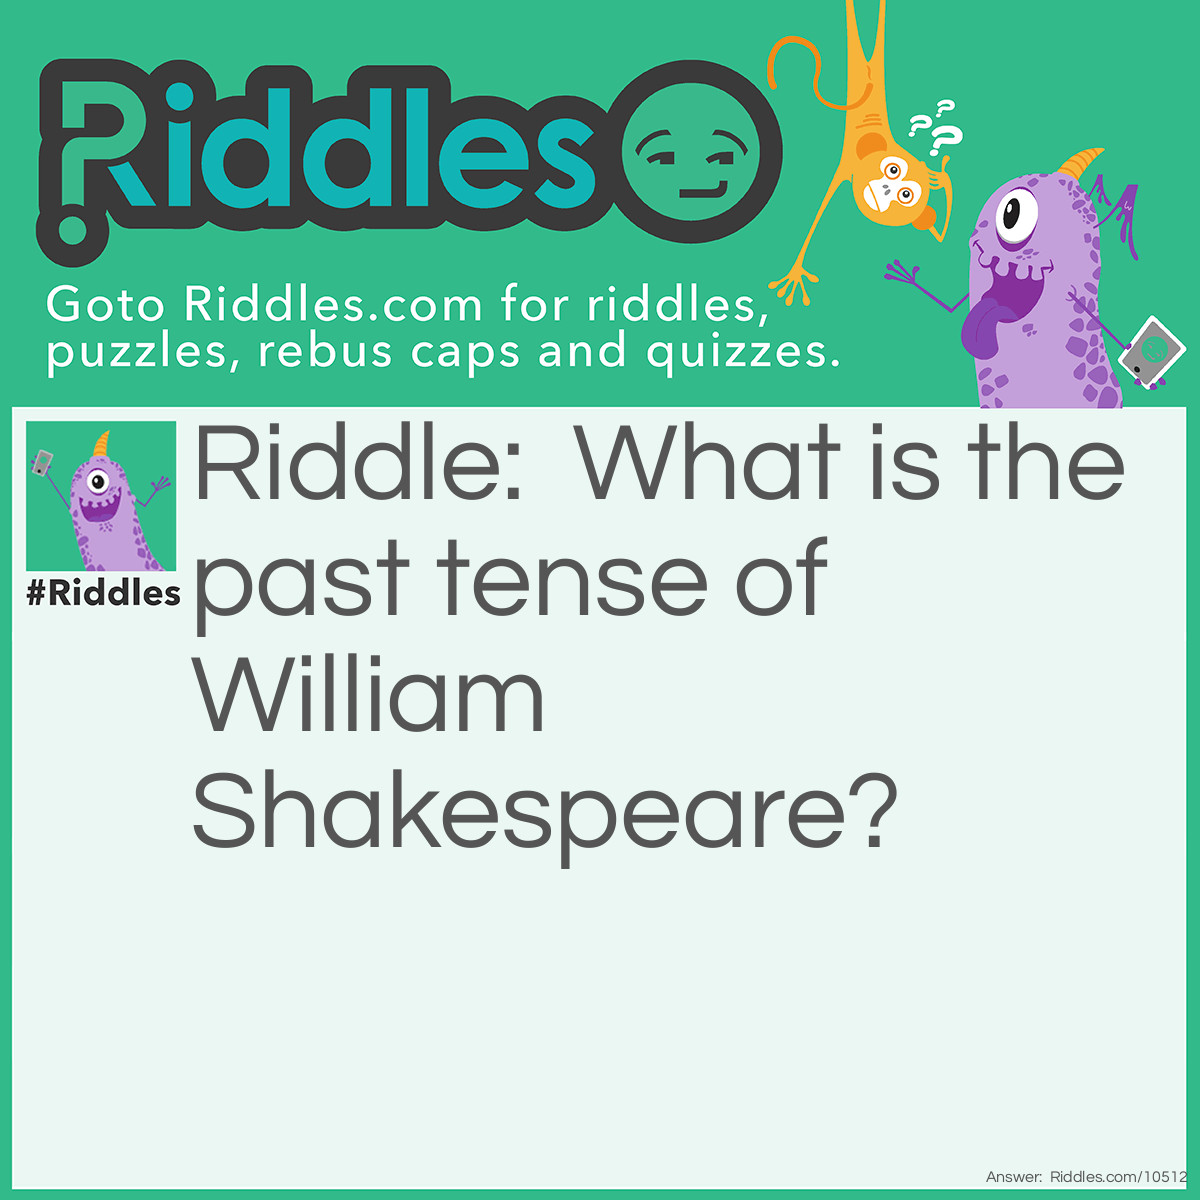 Riddle: What is the past tense of William Shakespeare? Answer: Wouldiwas Shookspeared! Isn't that great?